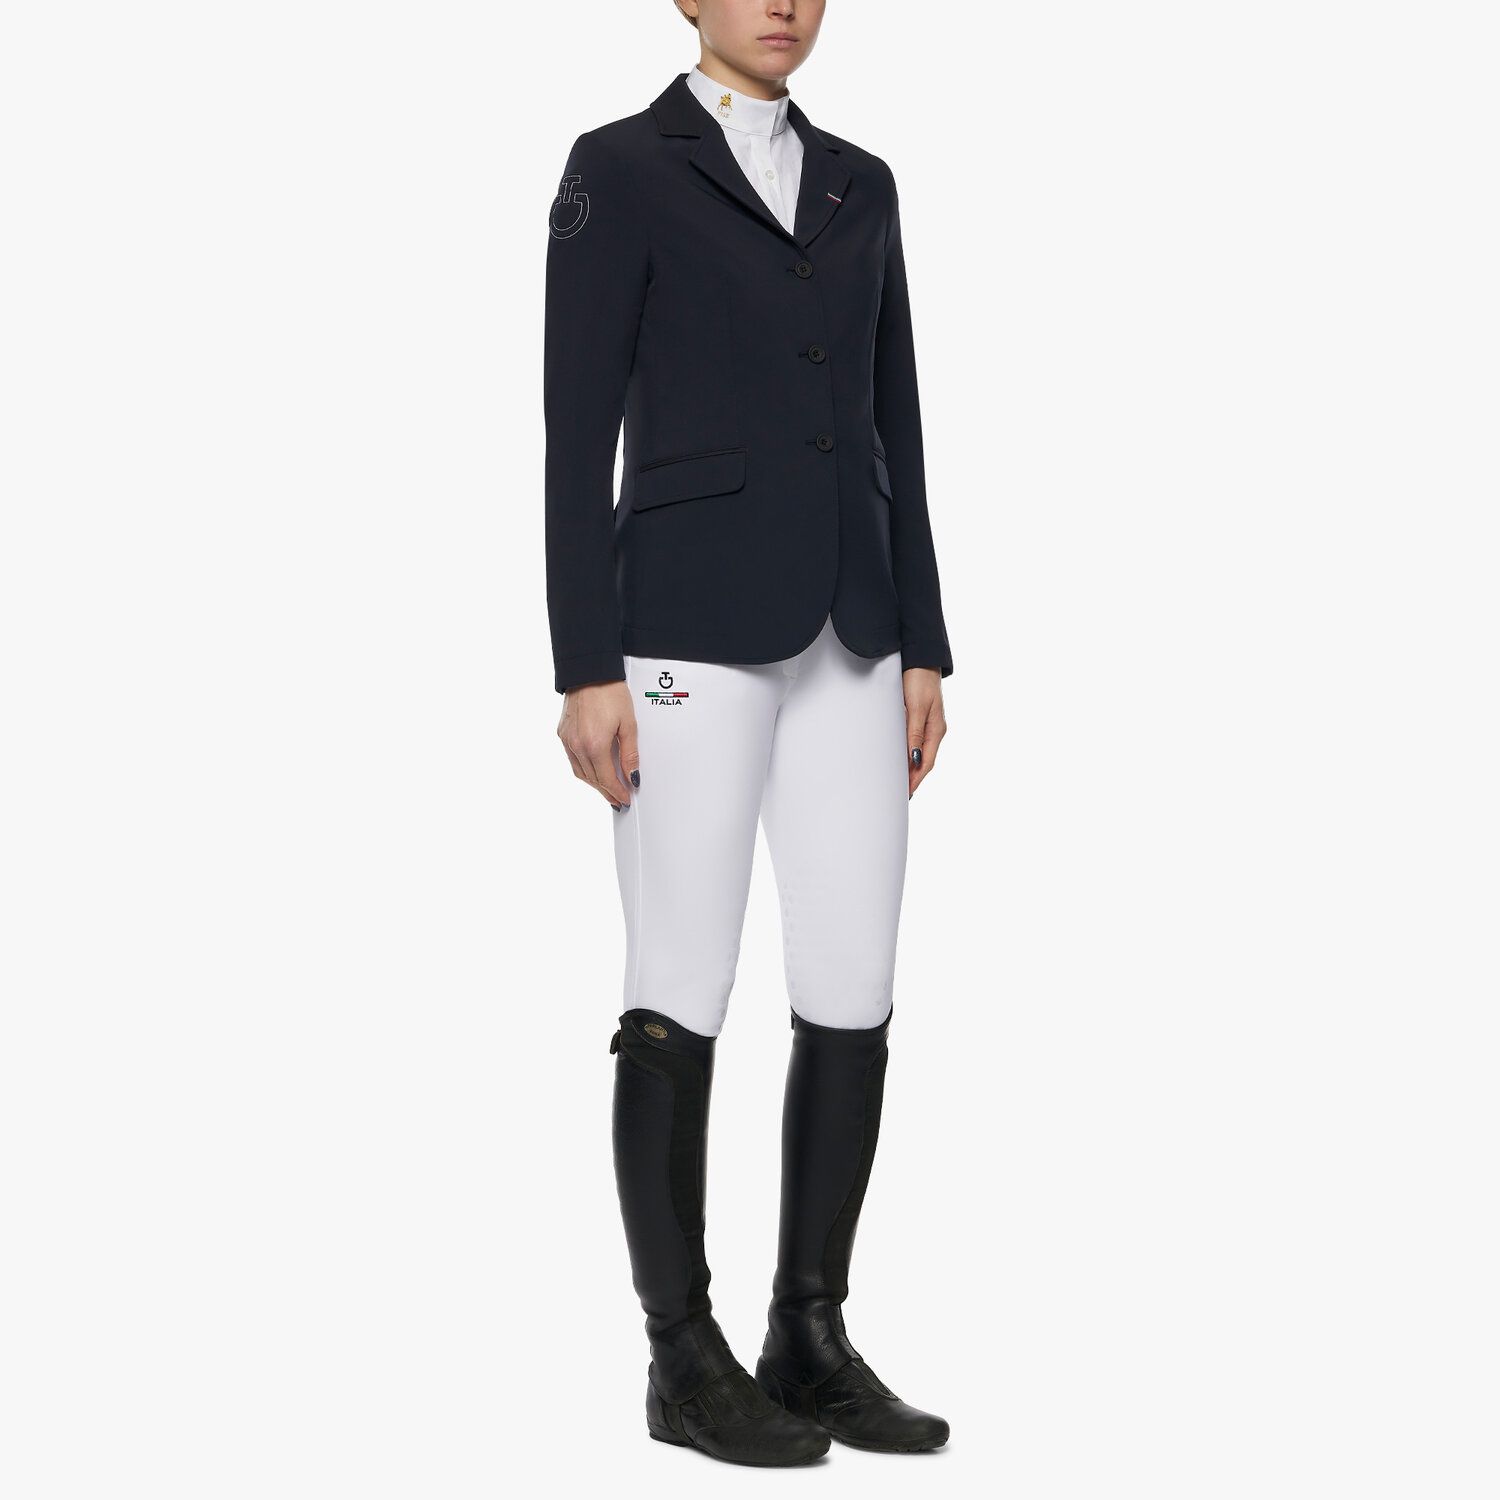 Cavalleria Toscana FISE WOMEN'S COMPETITION RIDING JACKET NAVY-2